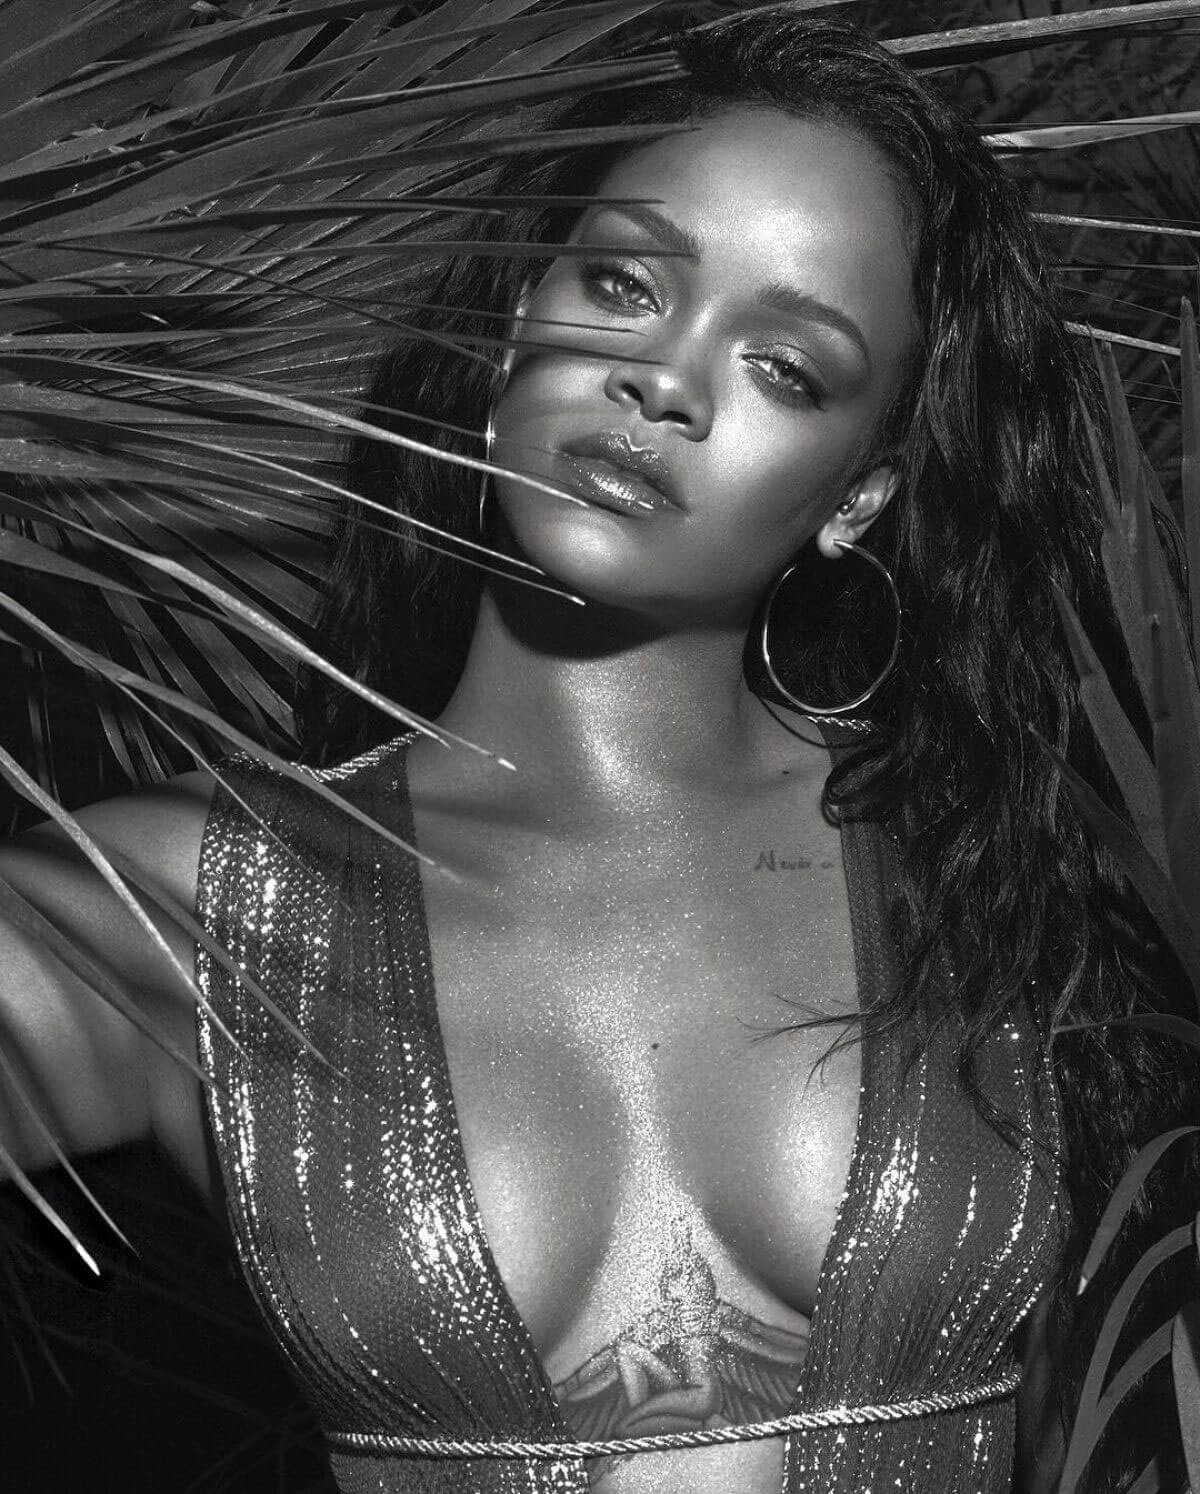 Rihanna Poses for Vogue Magazine Cover June 2018 Issue